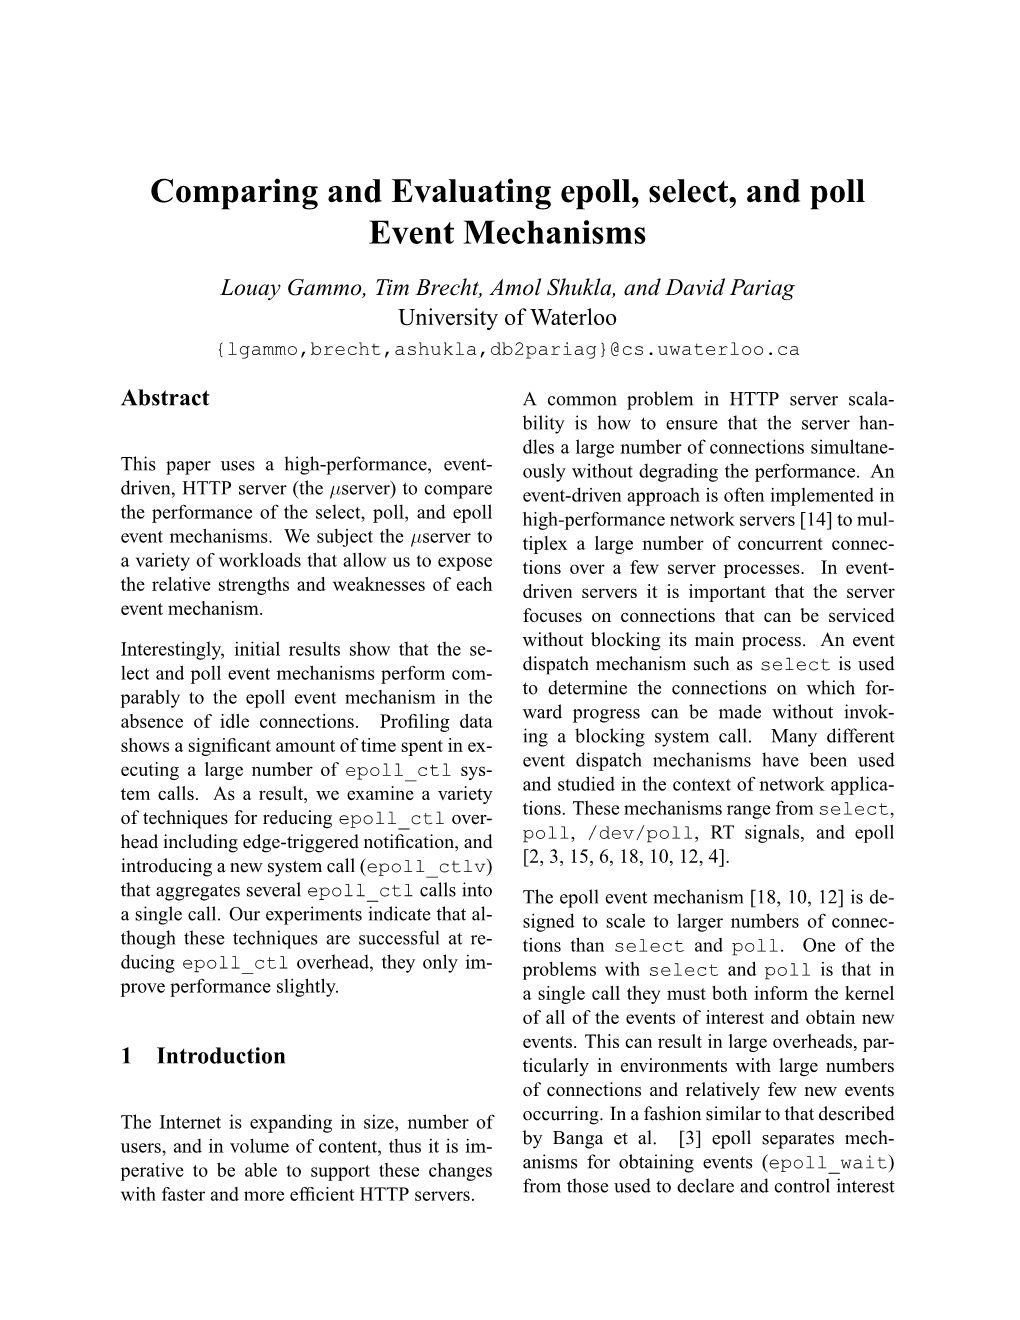 Comparing and Evaluating Epoll, Select, and Poll Event Mechanisms